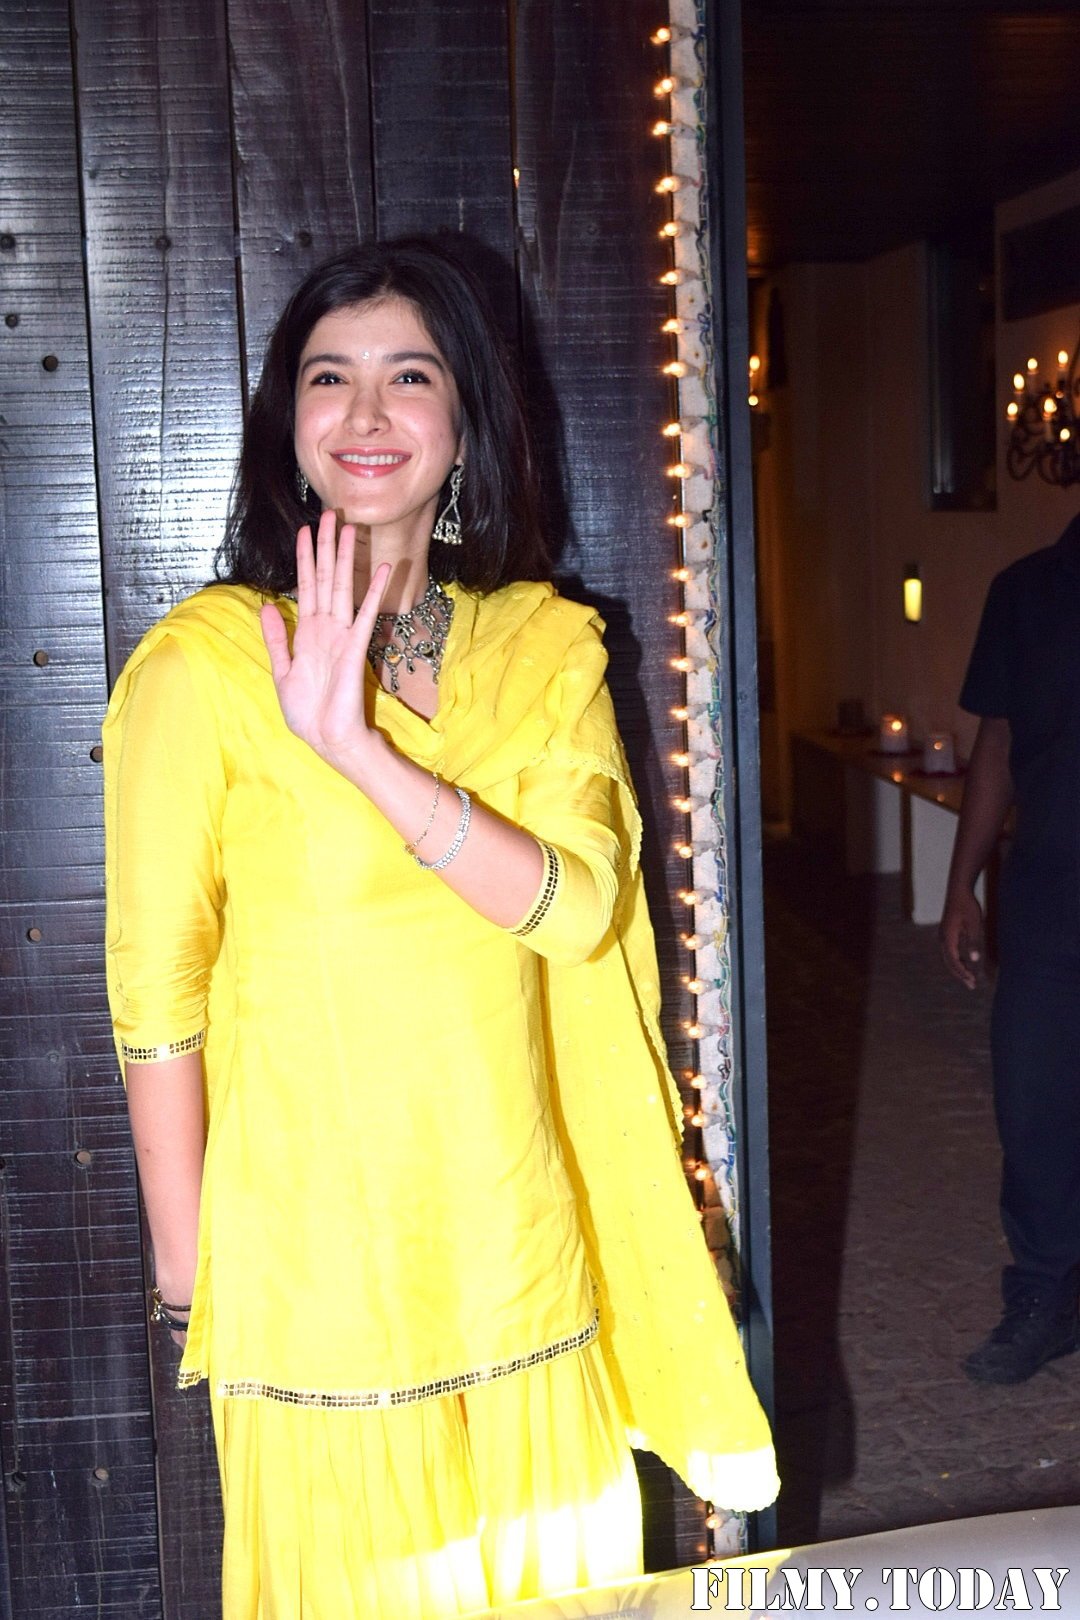 Shanaya Kapoor - Photos: Celebs At Celebration Of Karvachauth At Anil Kapoor's House | Picture 1692634